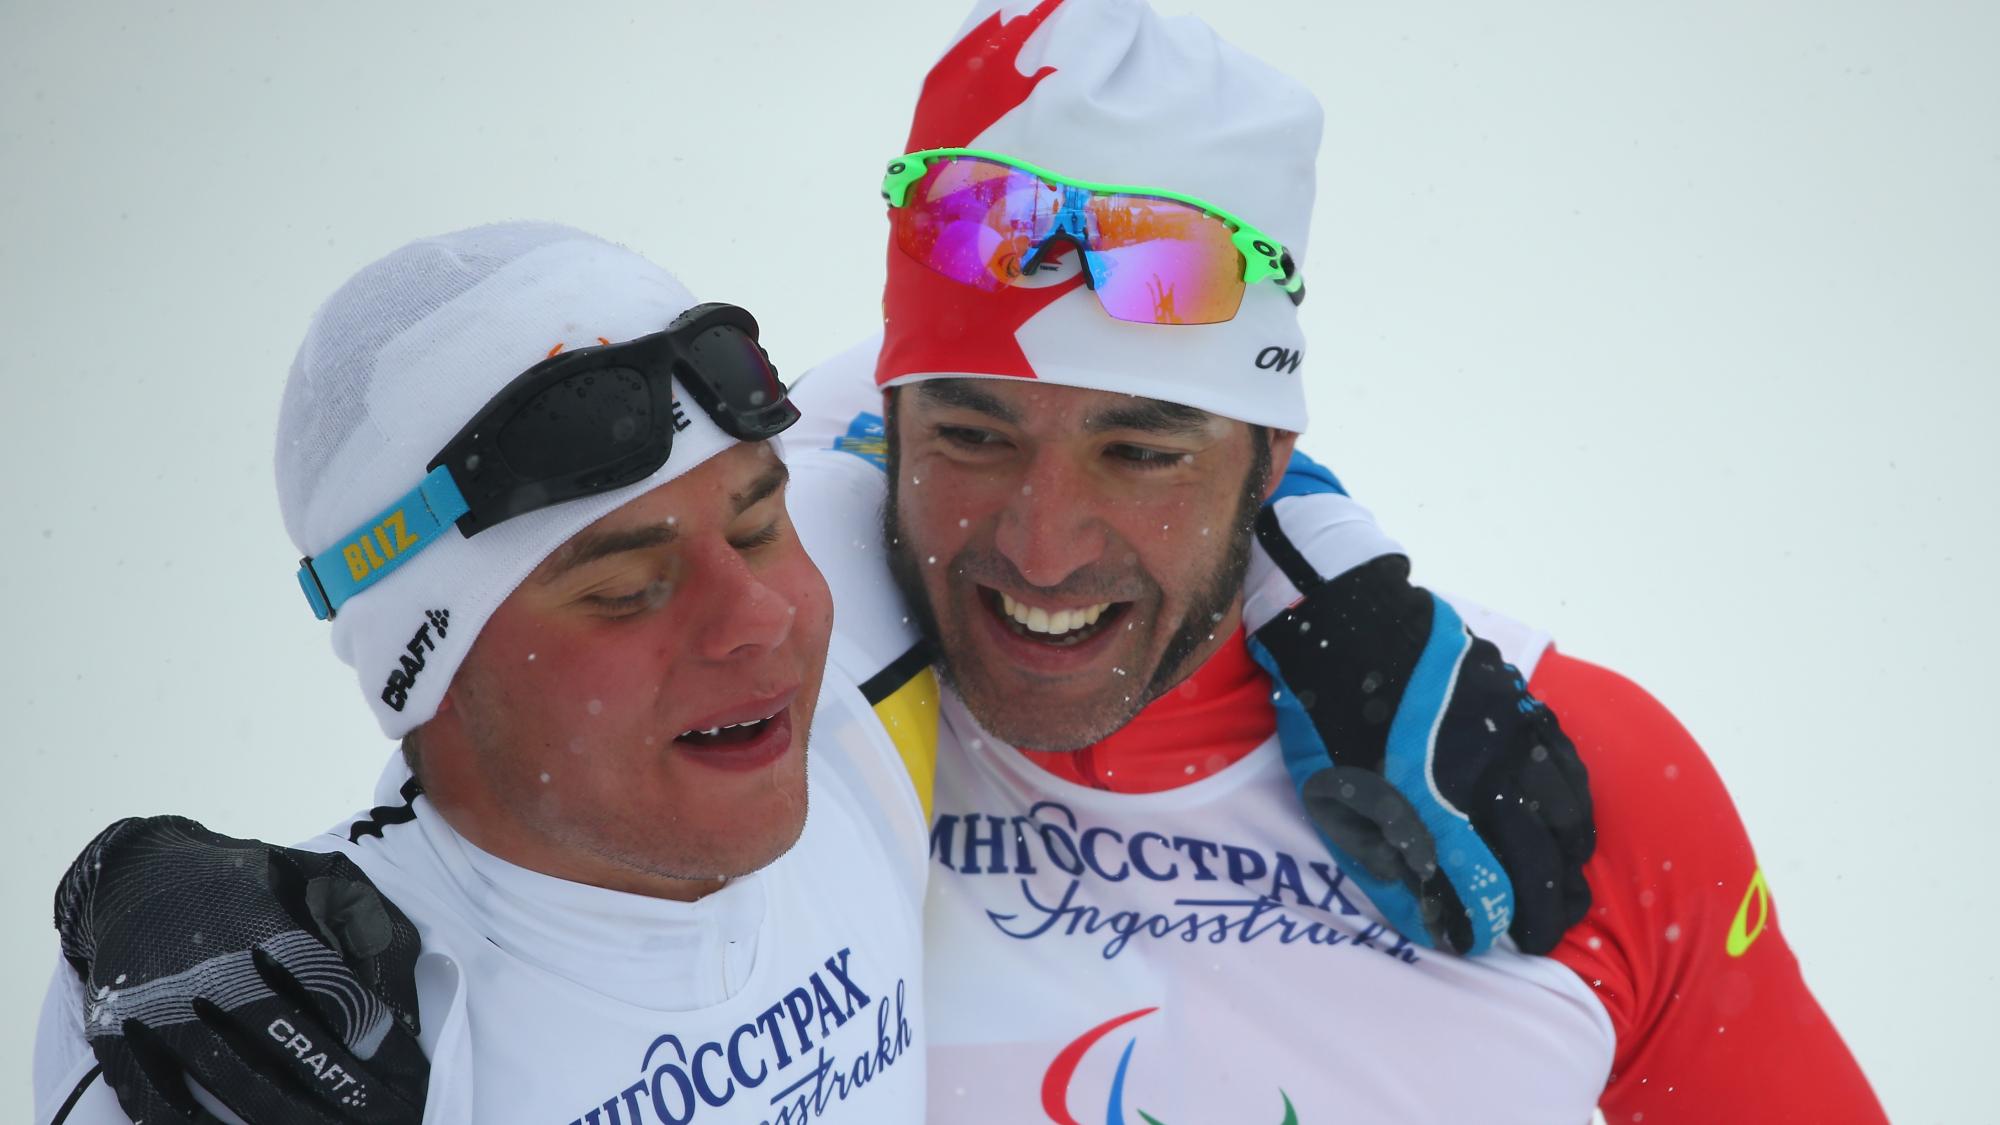 Two athletes embrace each other for a close-up photo.